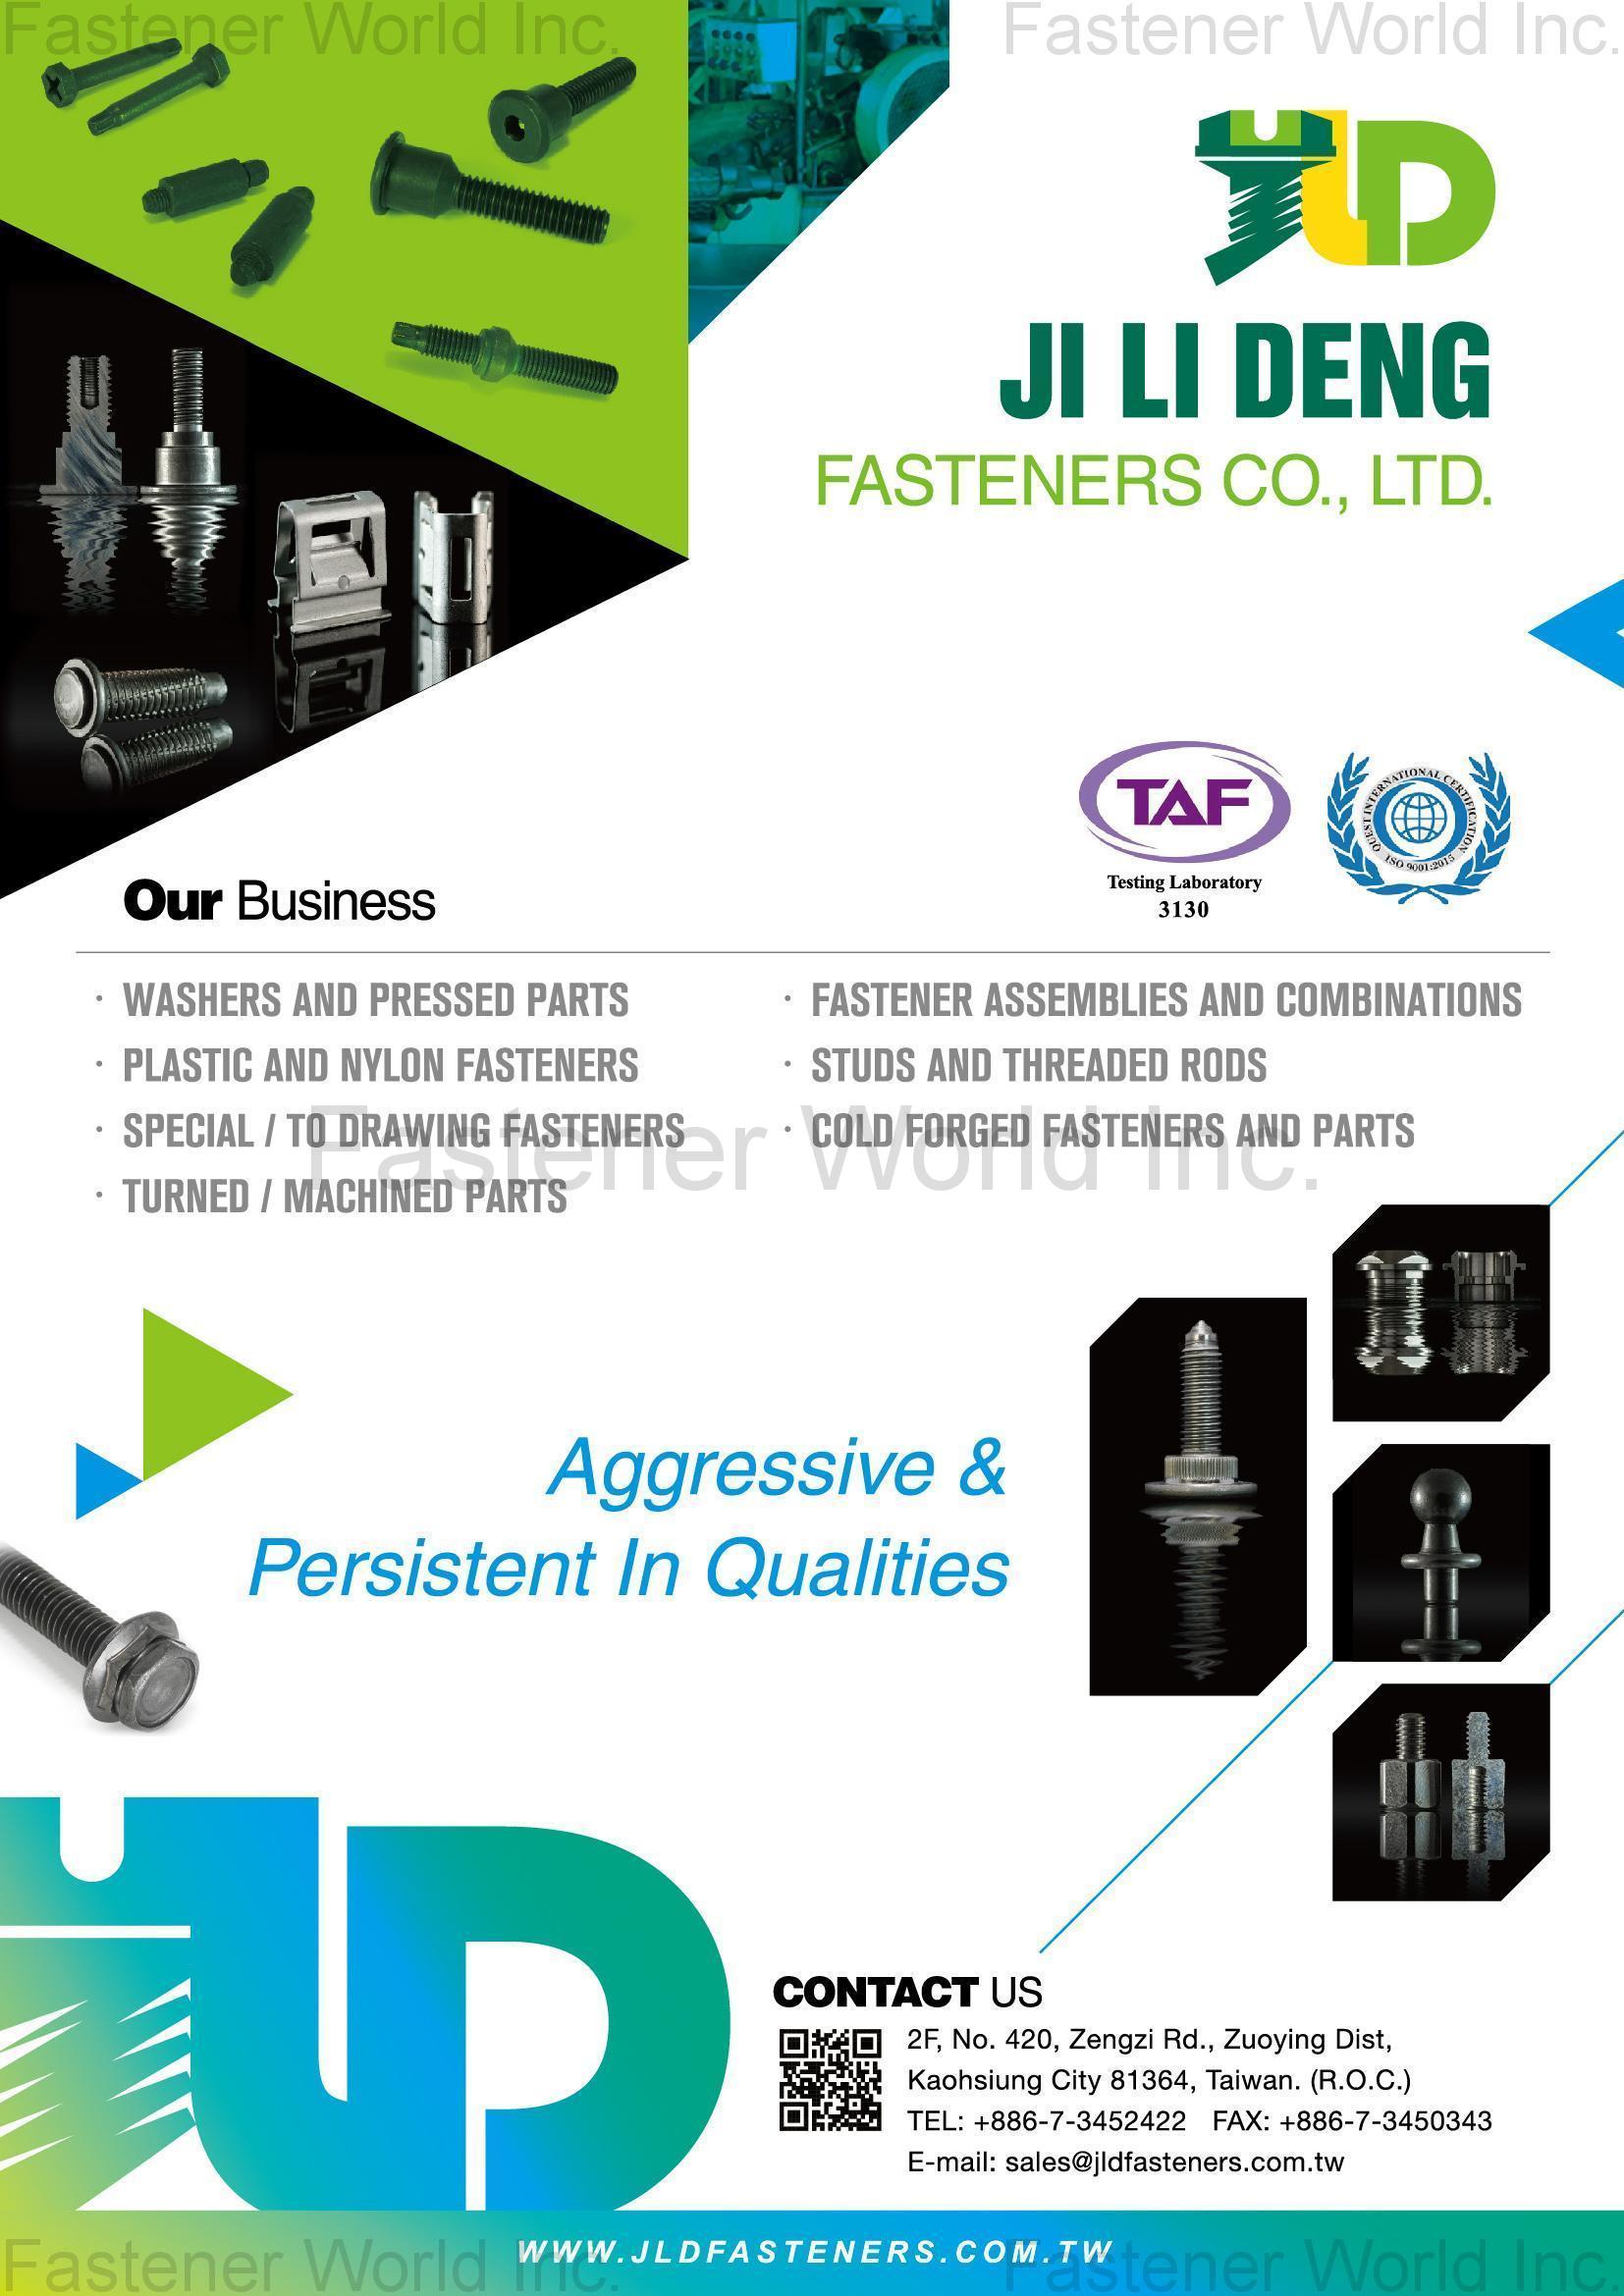 JI LI DENG FASTENERS CO., LTD. , WASHERS AND PRESSED PARTS, PLASTIC AND NYLON FASTENERS, SPECIAL / TO DRAWING FASTENERS, TURNED / MACHINED PARTS, FASTENER ASSEMBLIES AND COMBINATIONS, STUDS AND THREADED RODS, COLD FORGED FASTENERS AND PARTS